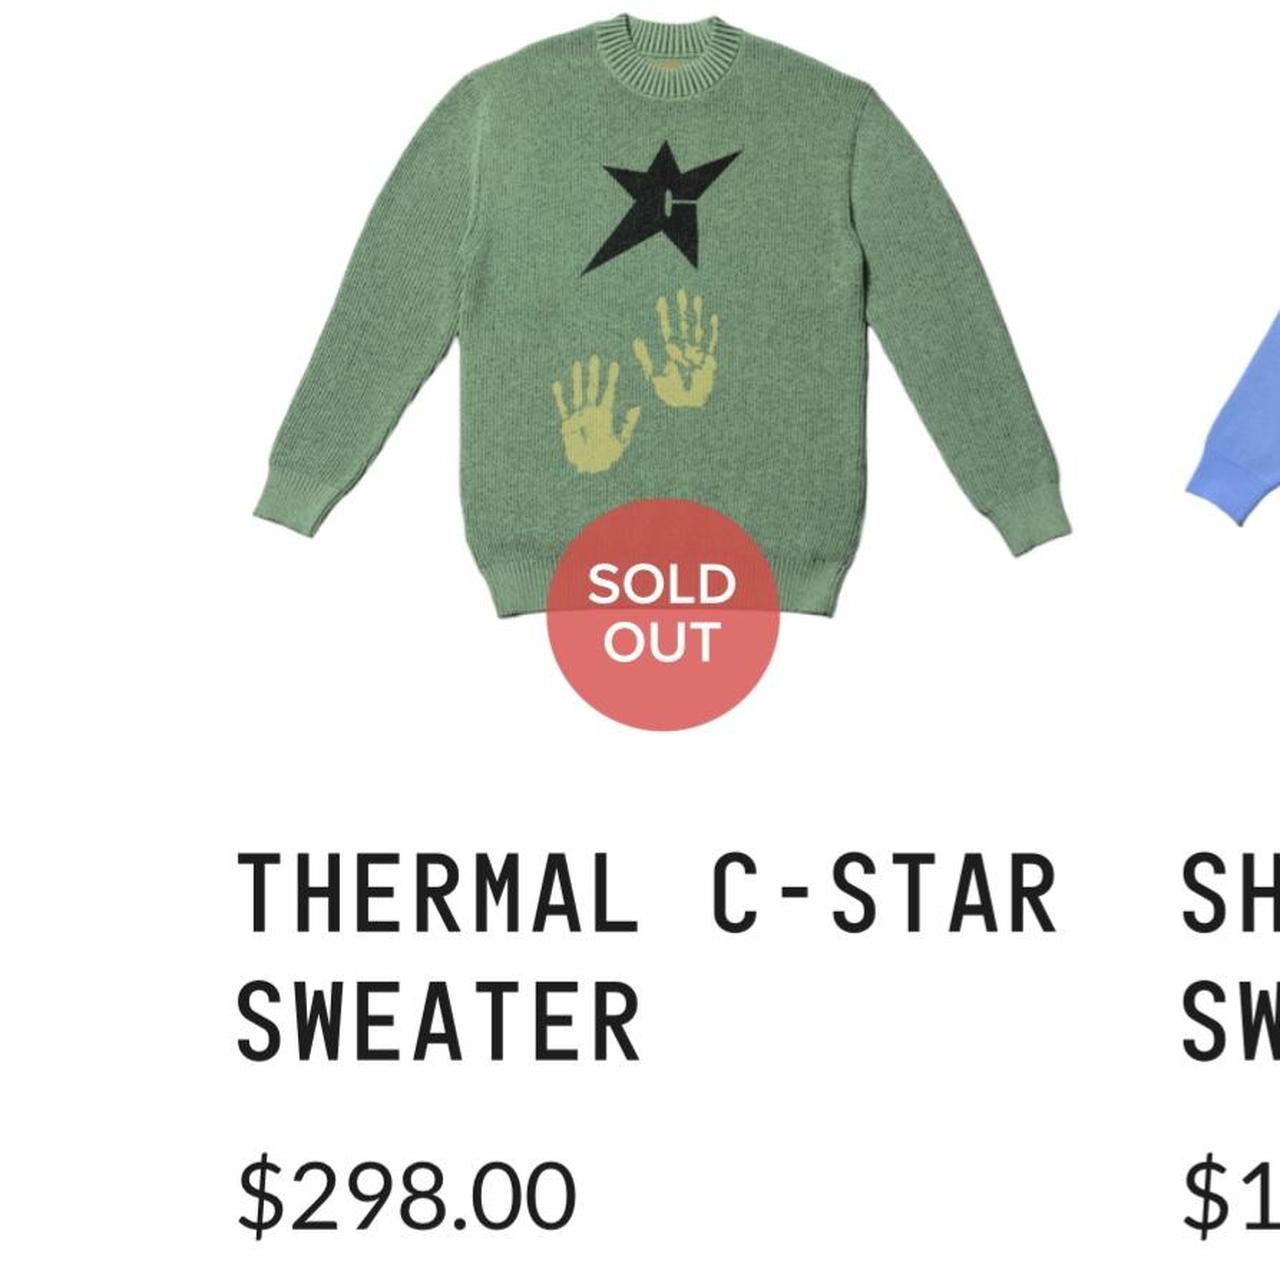 Carpet Company Thermal C-Star Sweater , As seen on...